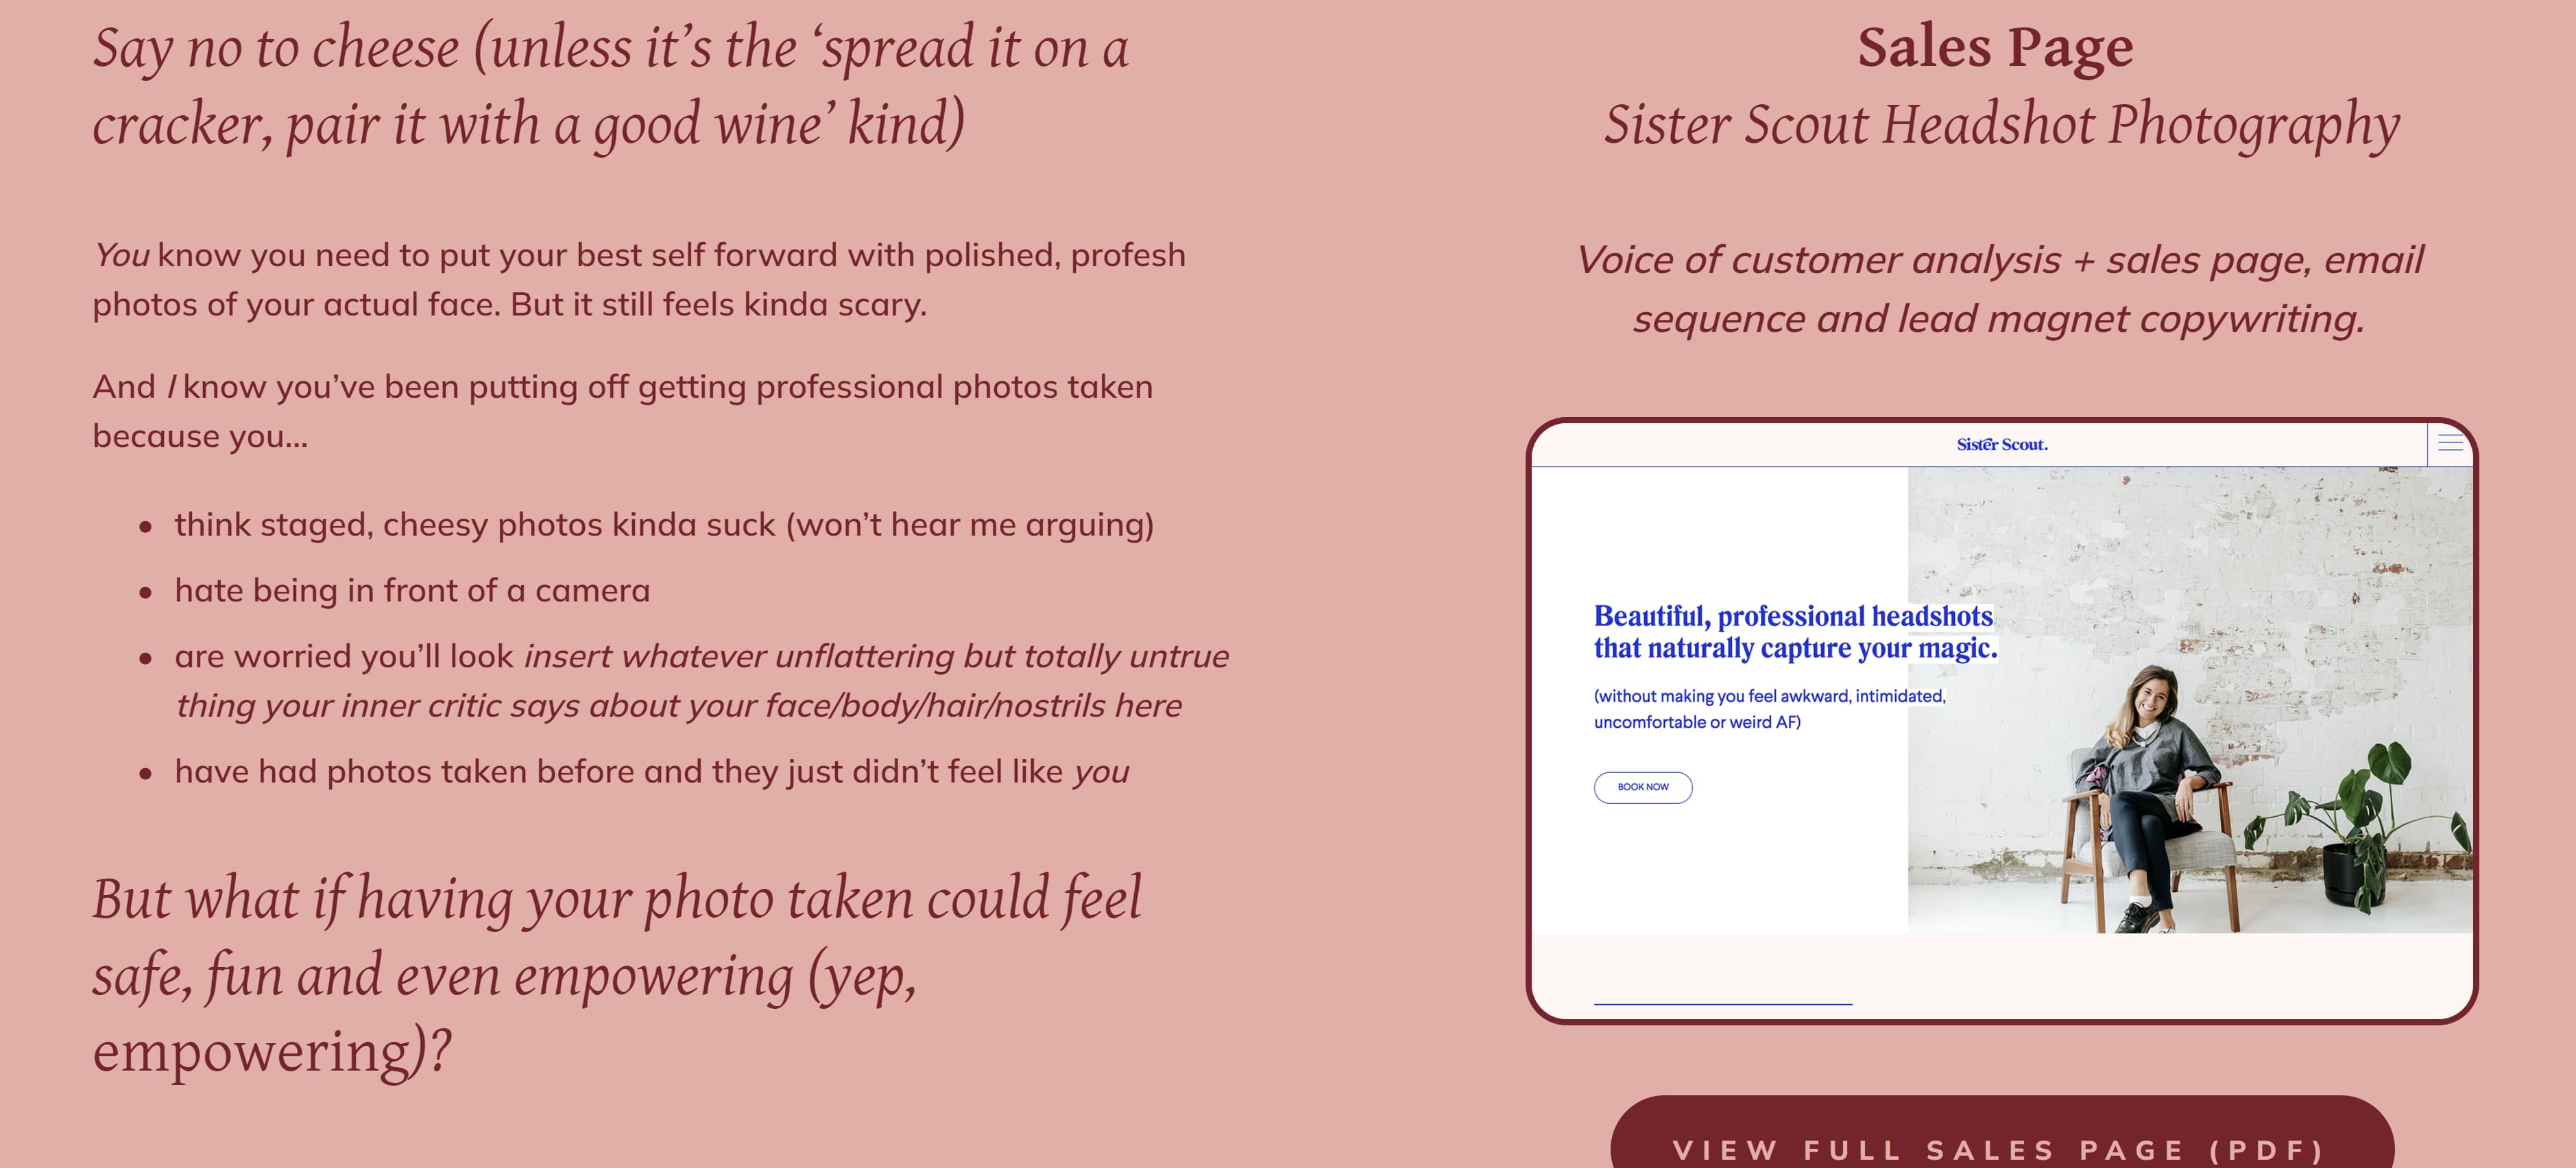 25 Copywriting Portfolio Examples That Will Secure Your Next Gig - HubSpot (Picture 19)